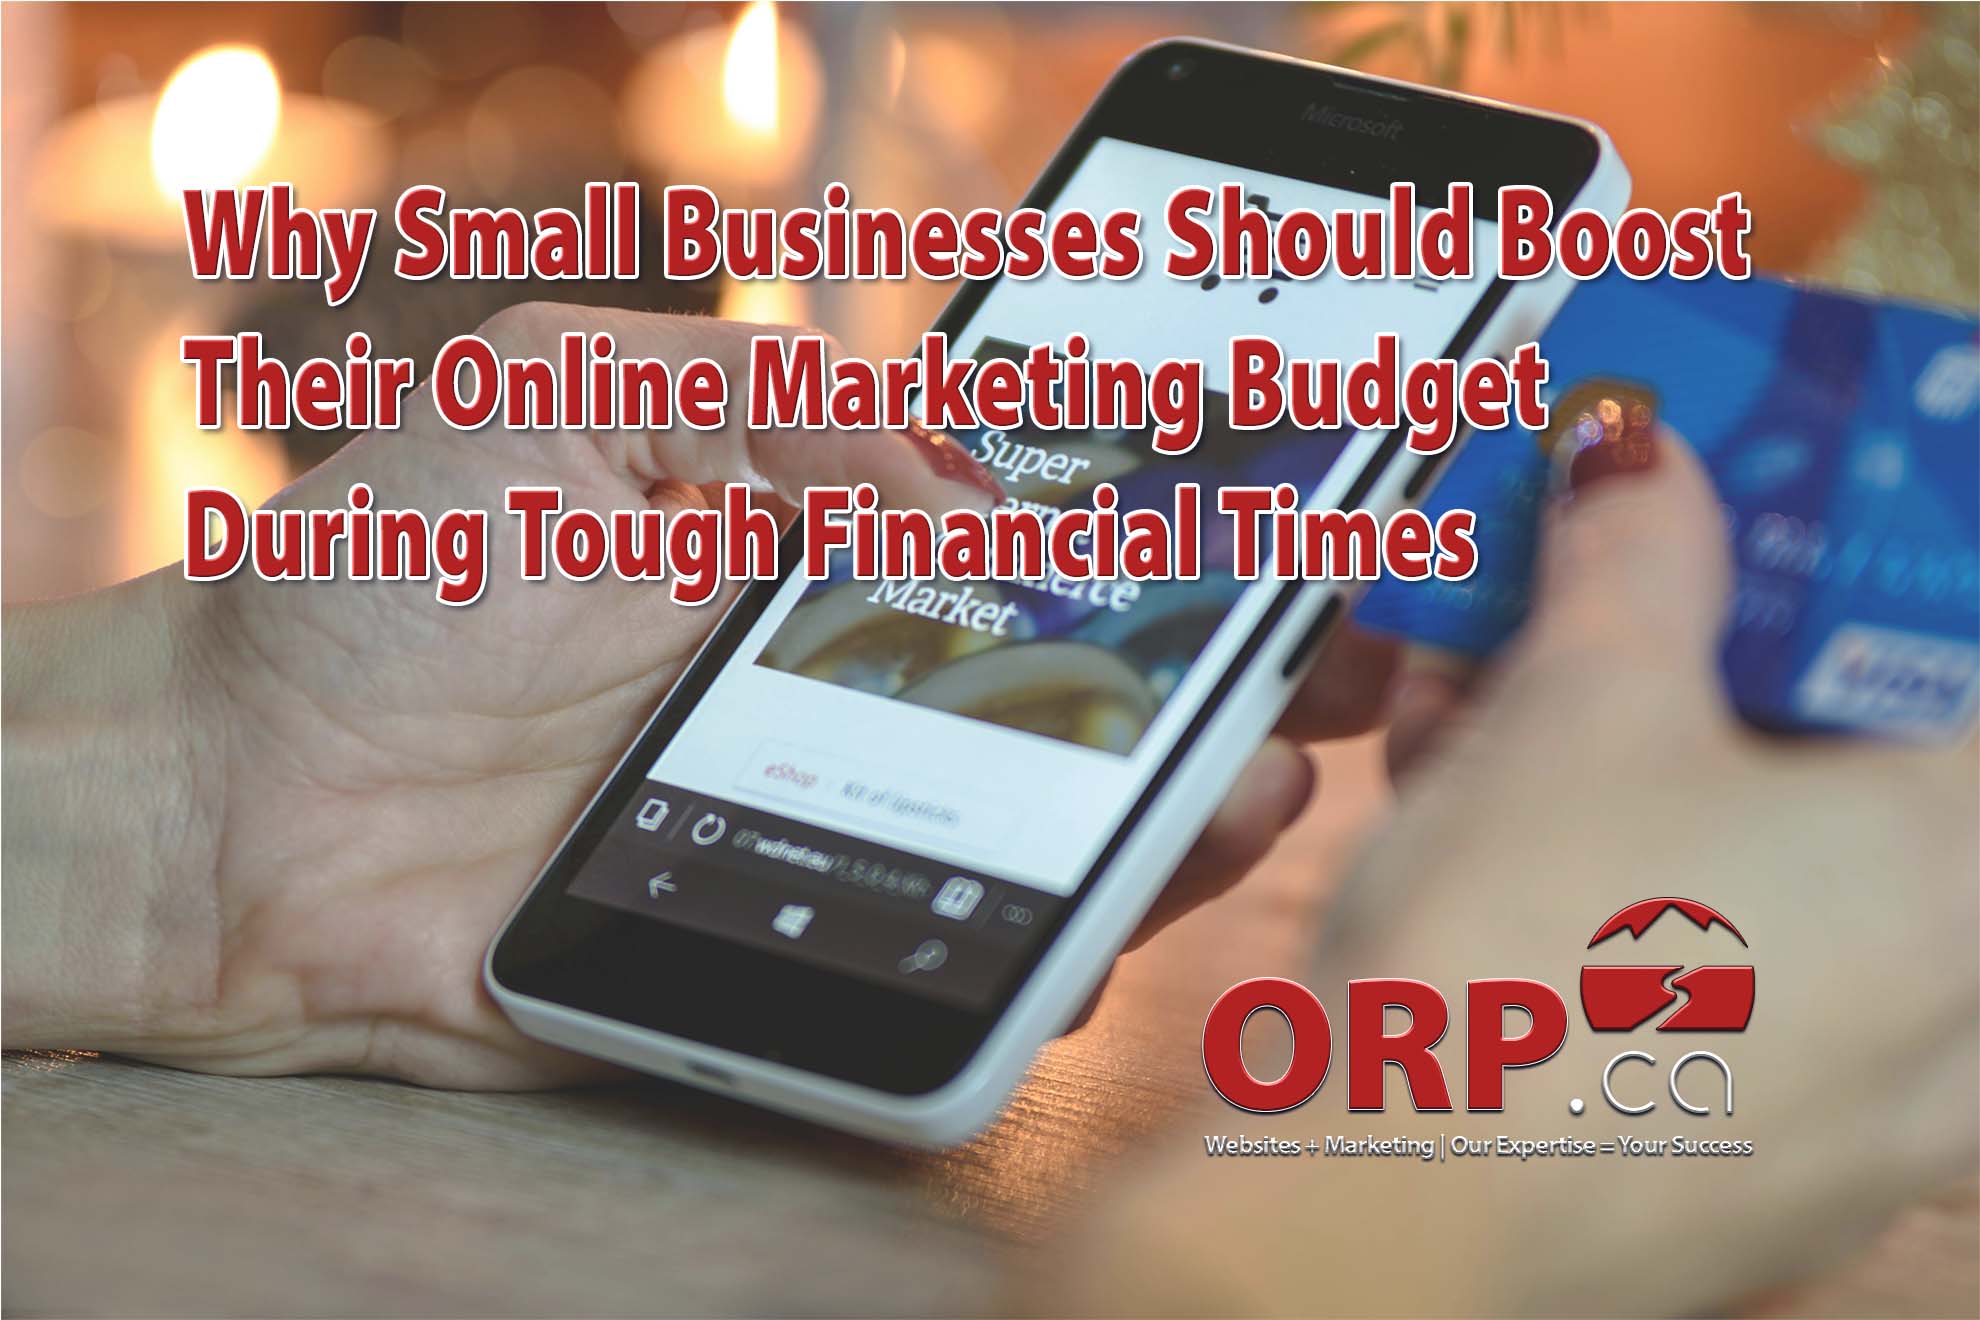 Why Small Businesses Should Boost Their Online Marketing Budget During Tough Financial Times - a small business digital marketing article from ORP.ca, Your Small Business Website and Digital Marketing Services Provider